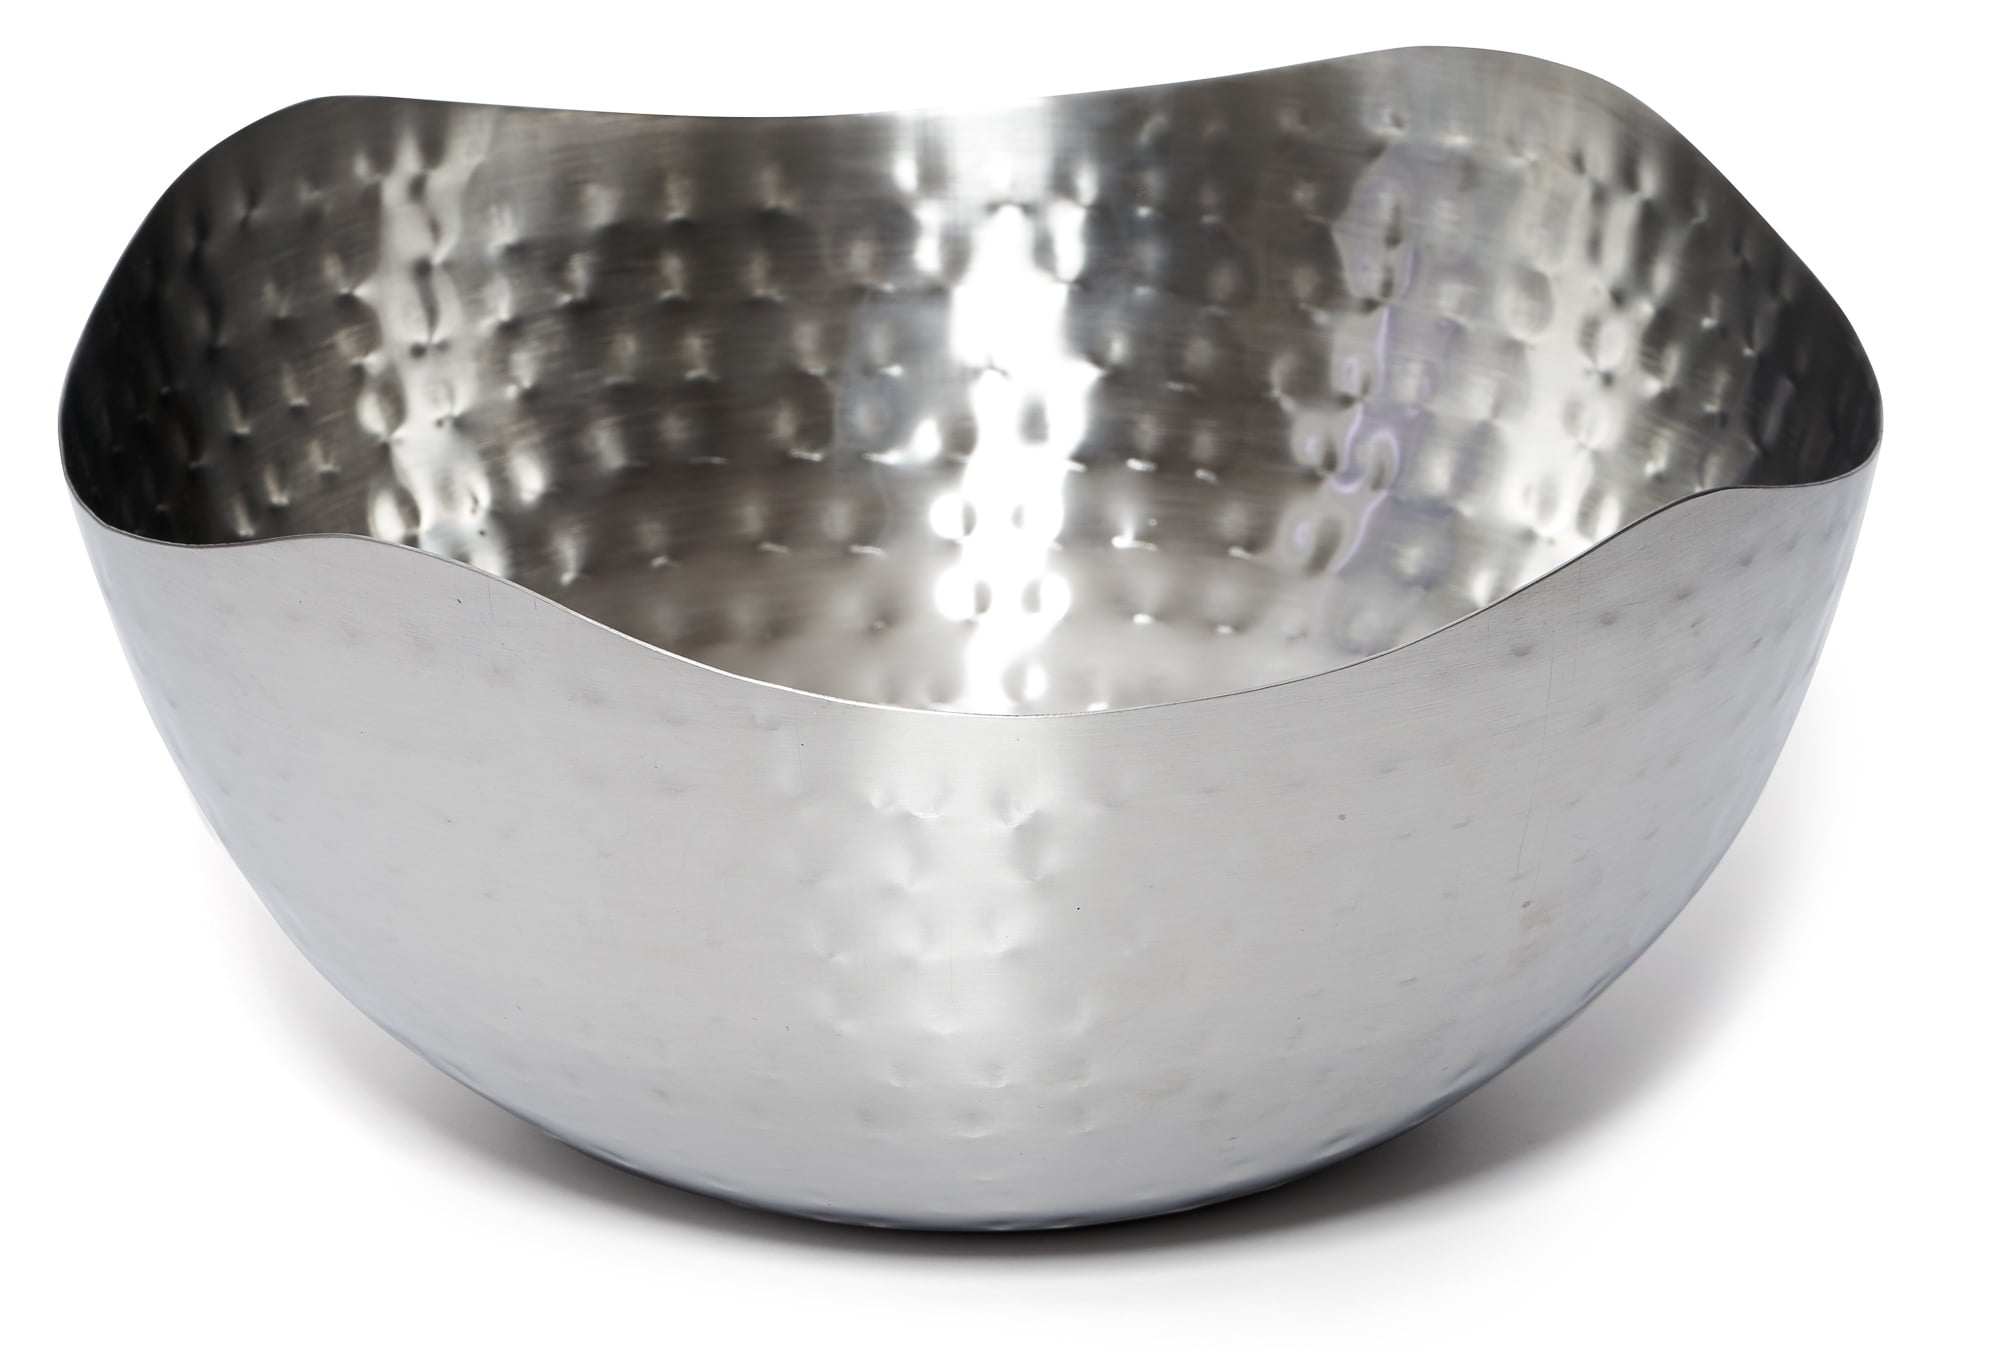 10x10 Doma Vita Hammered Stainless Steel Wave Salad/Serving/Fruit Bowl Silver 